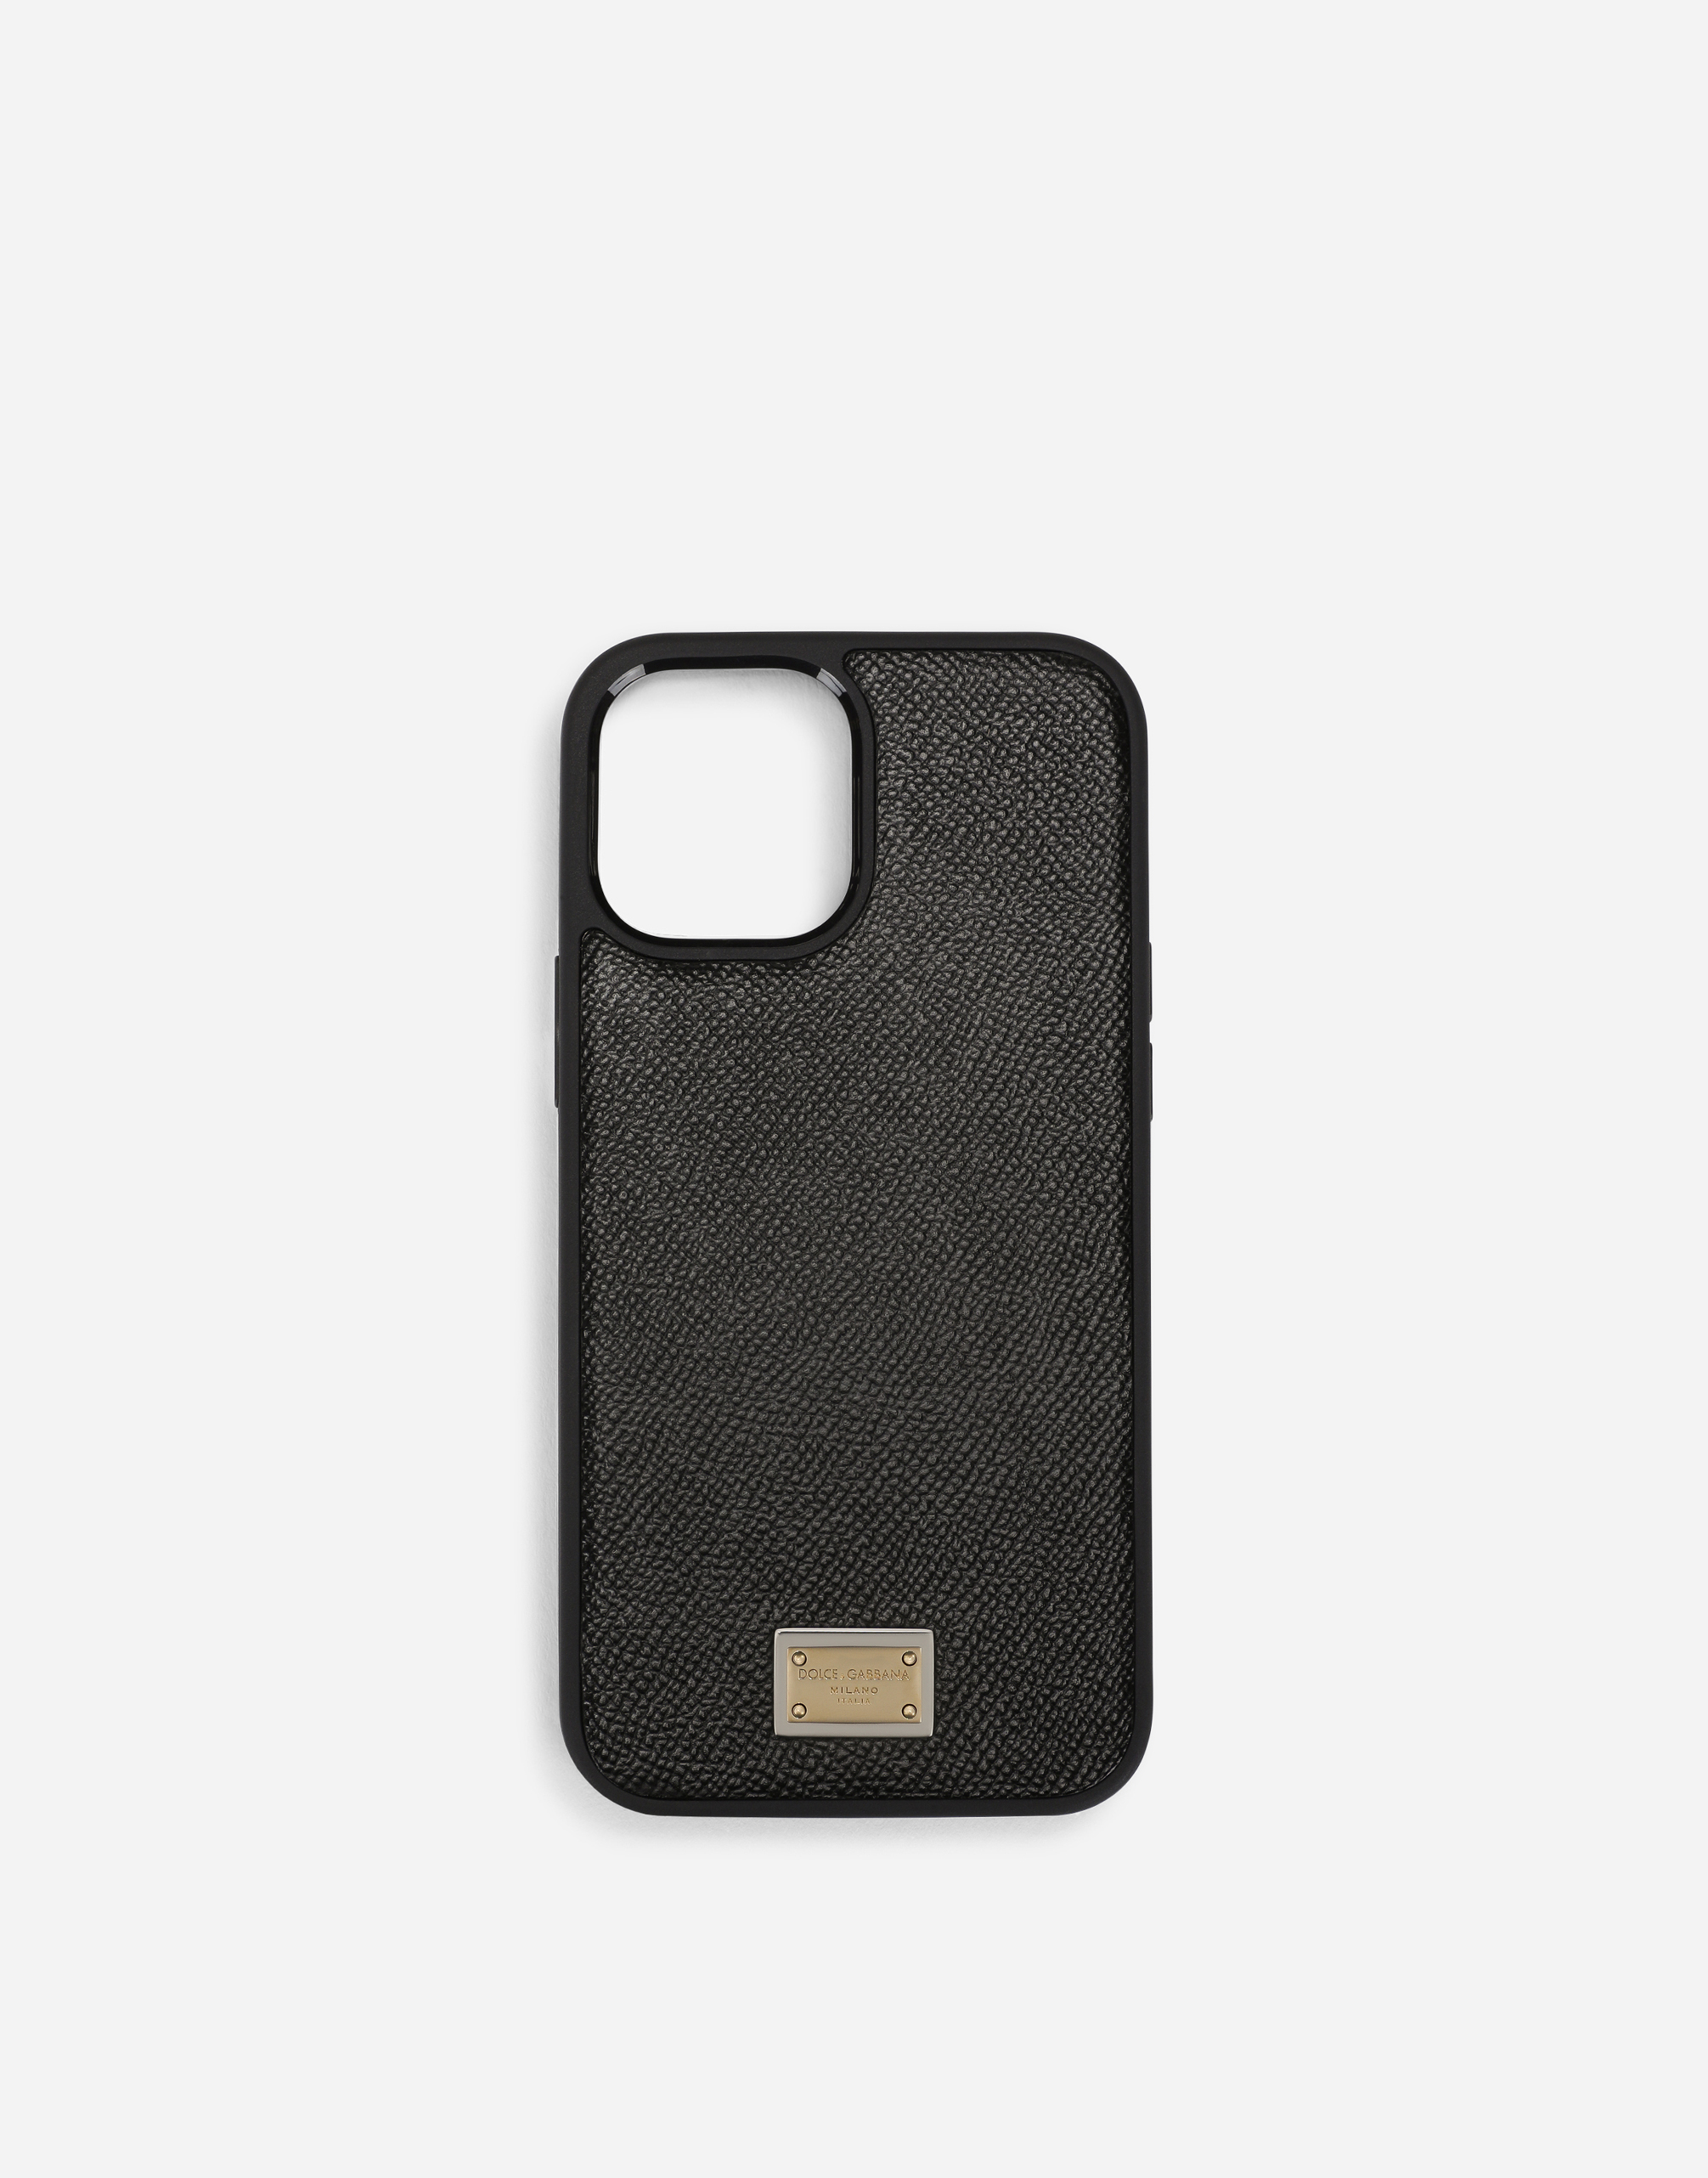 Dauphine calfskin iPhone 12 Pro cover with plate in Black